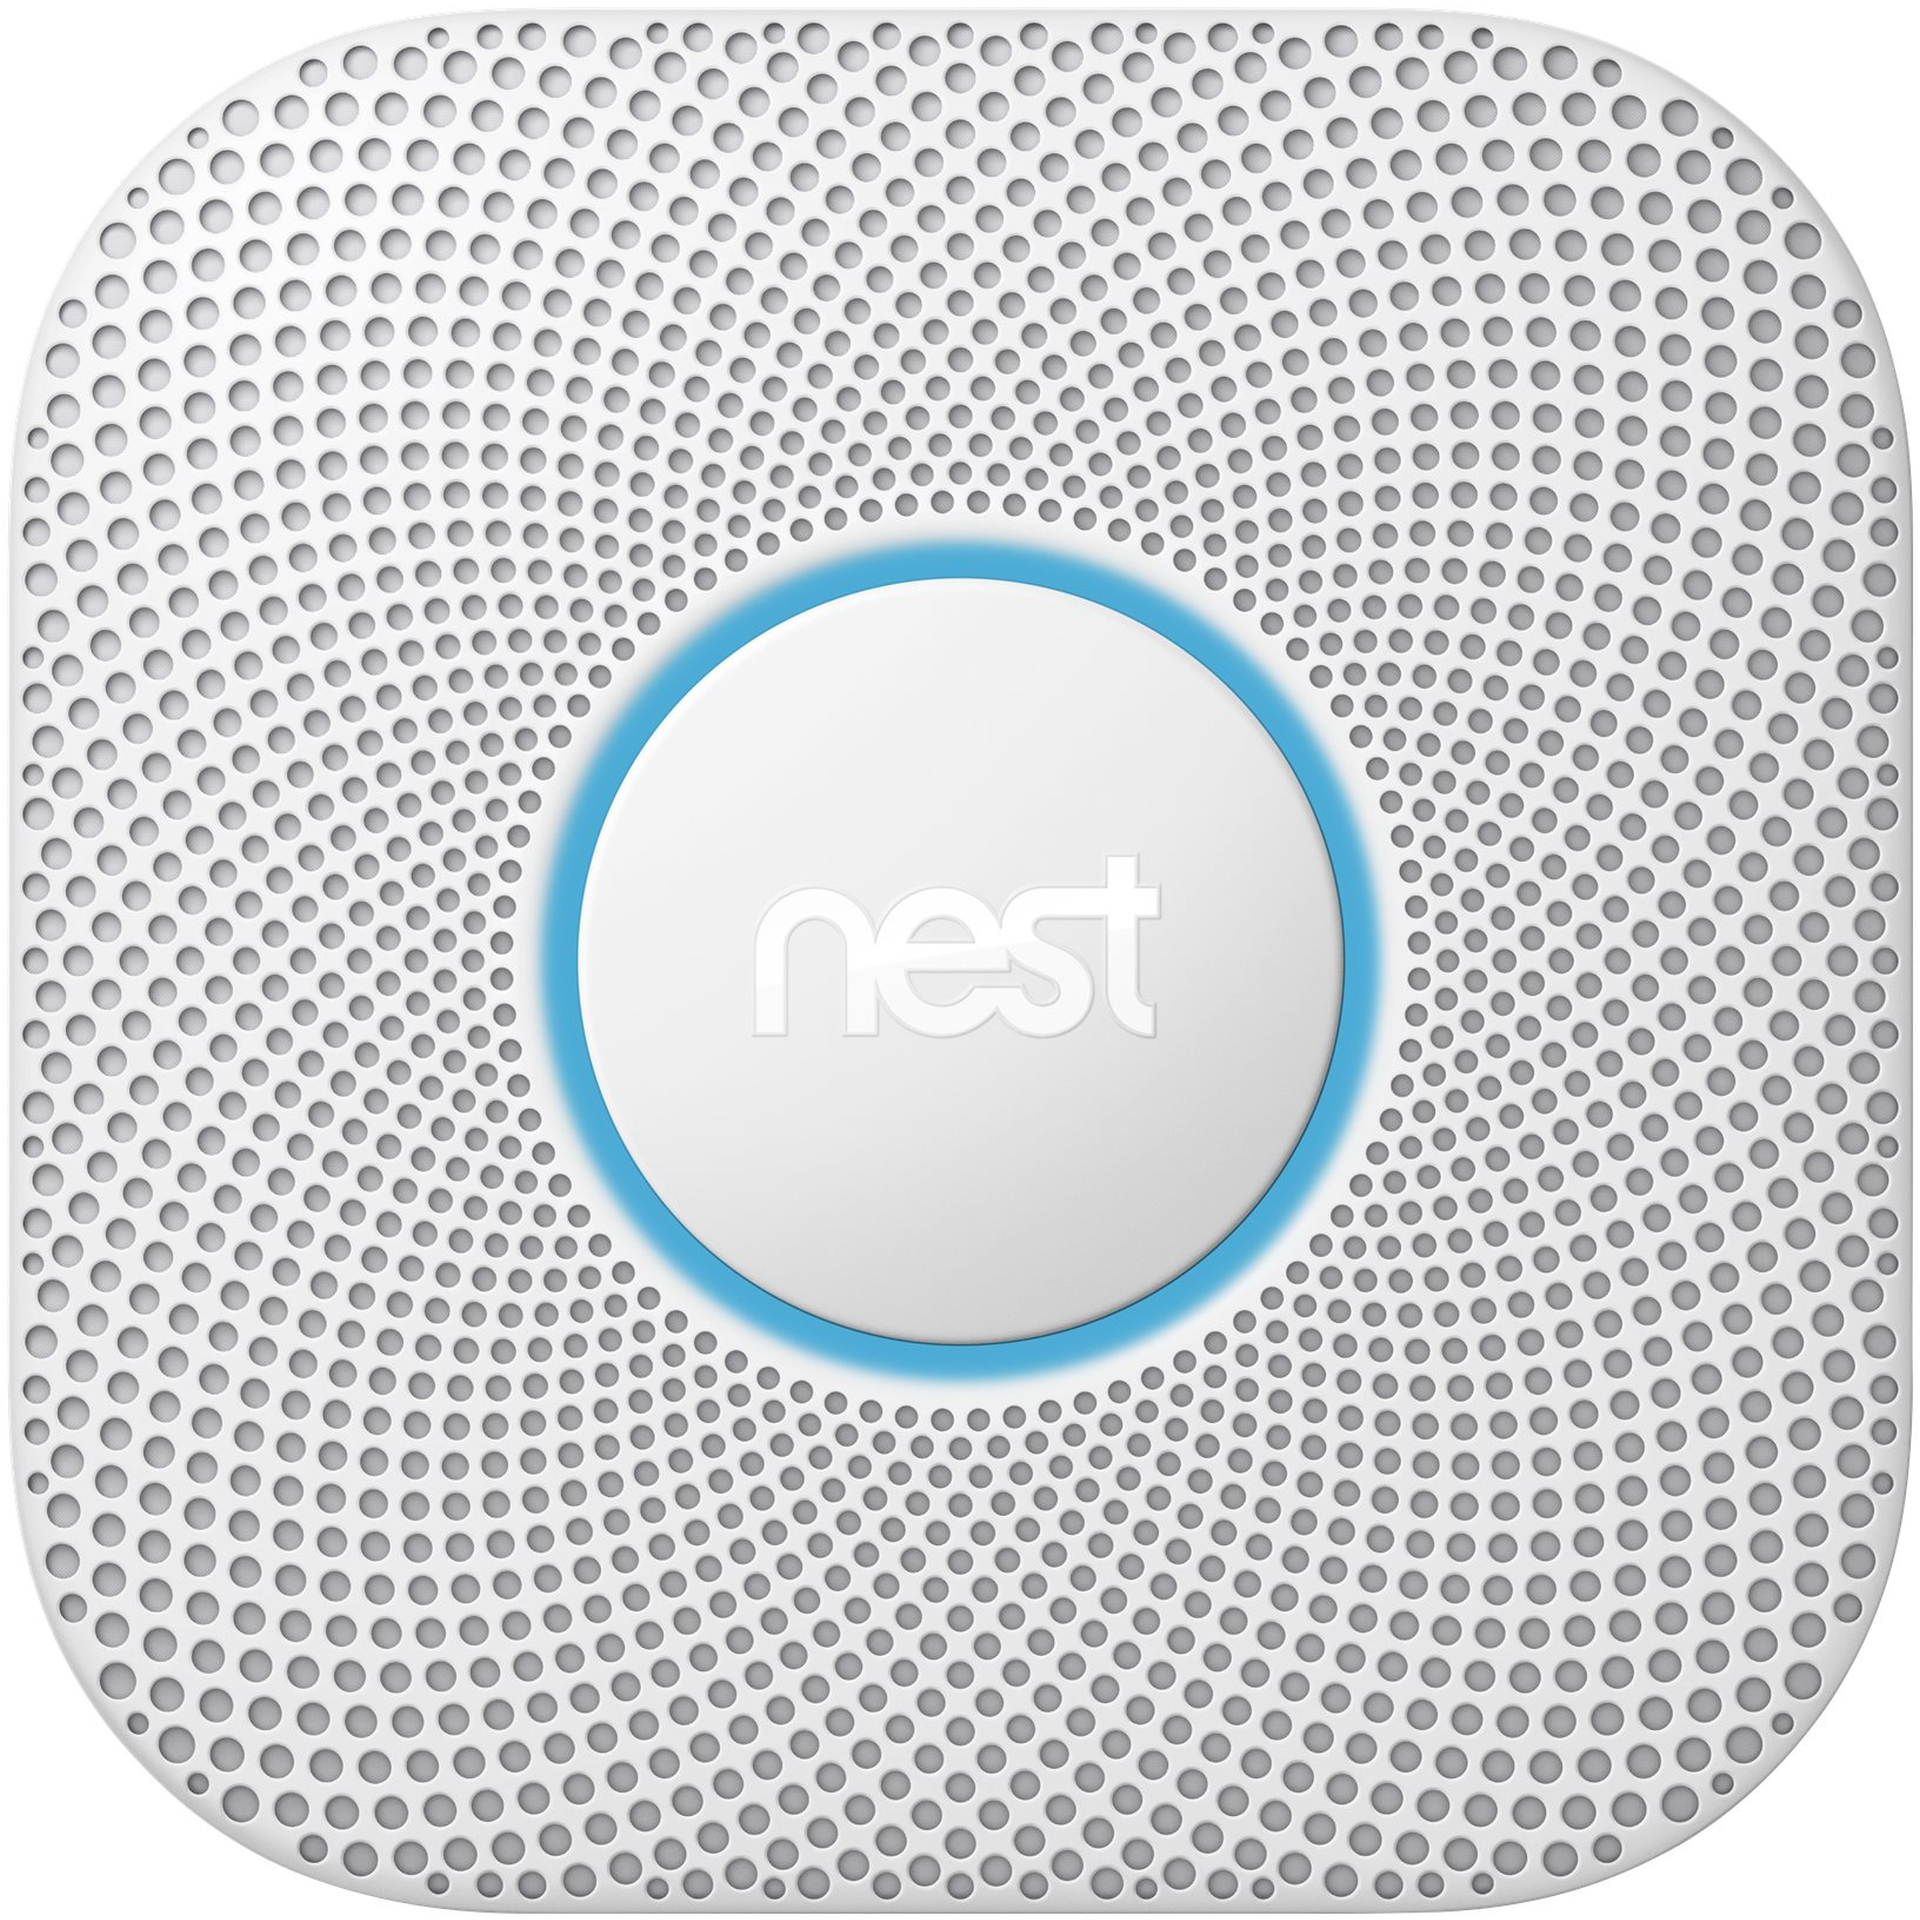 813917020876 Google Nest Protect 2nd Generation Battery - White Hus & Have,Smart Home,Alarm & overvågning 20500236737 S3000BWSE